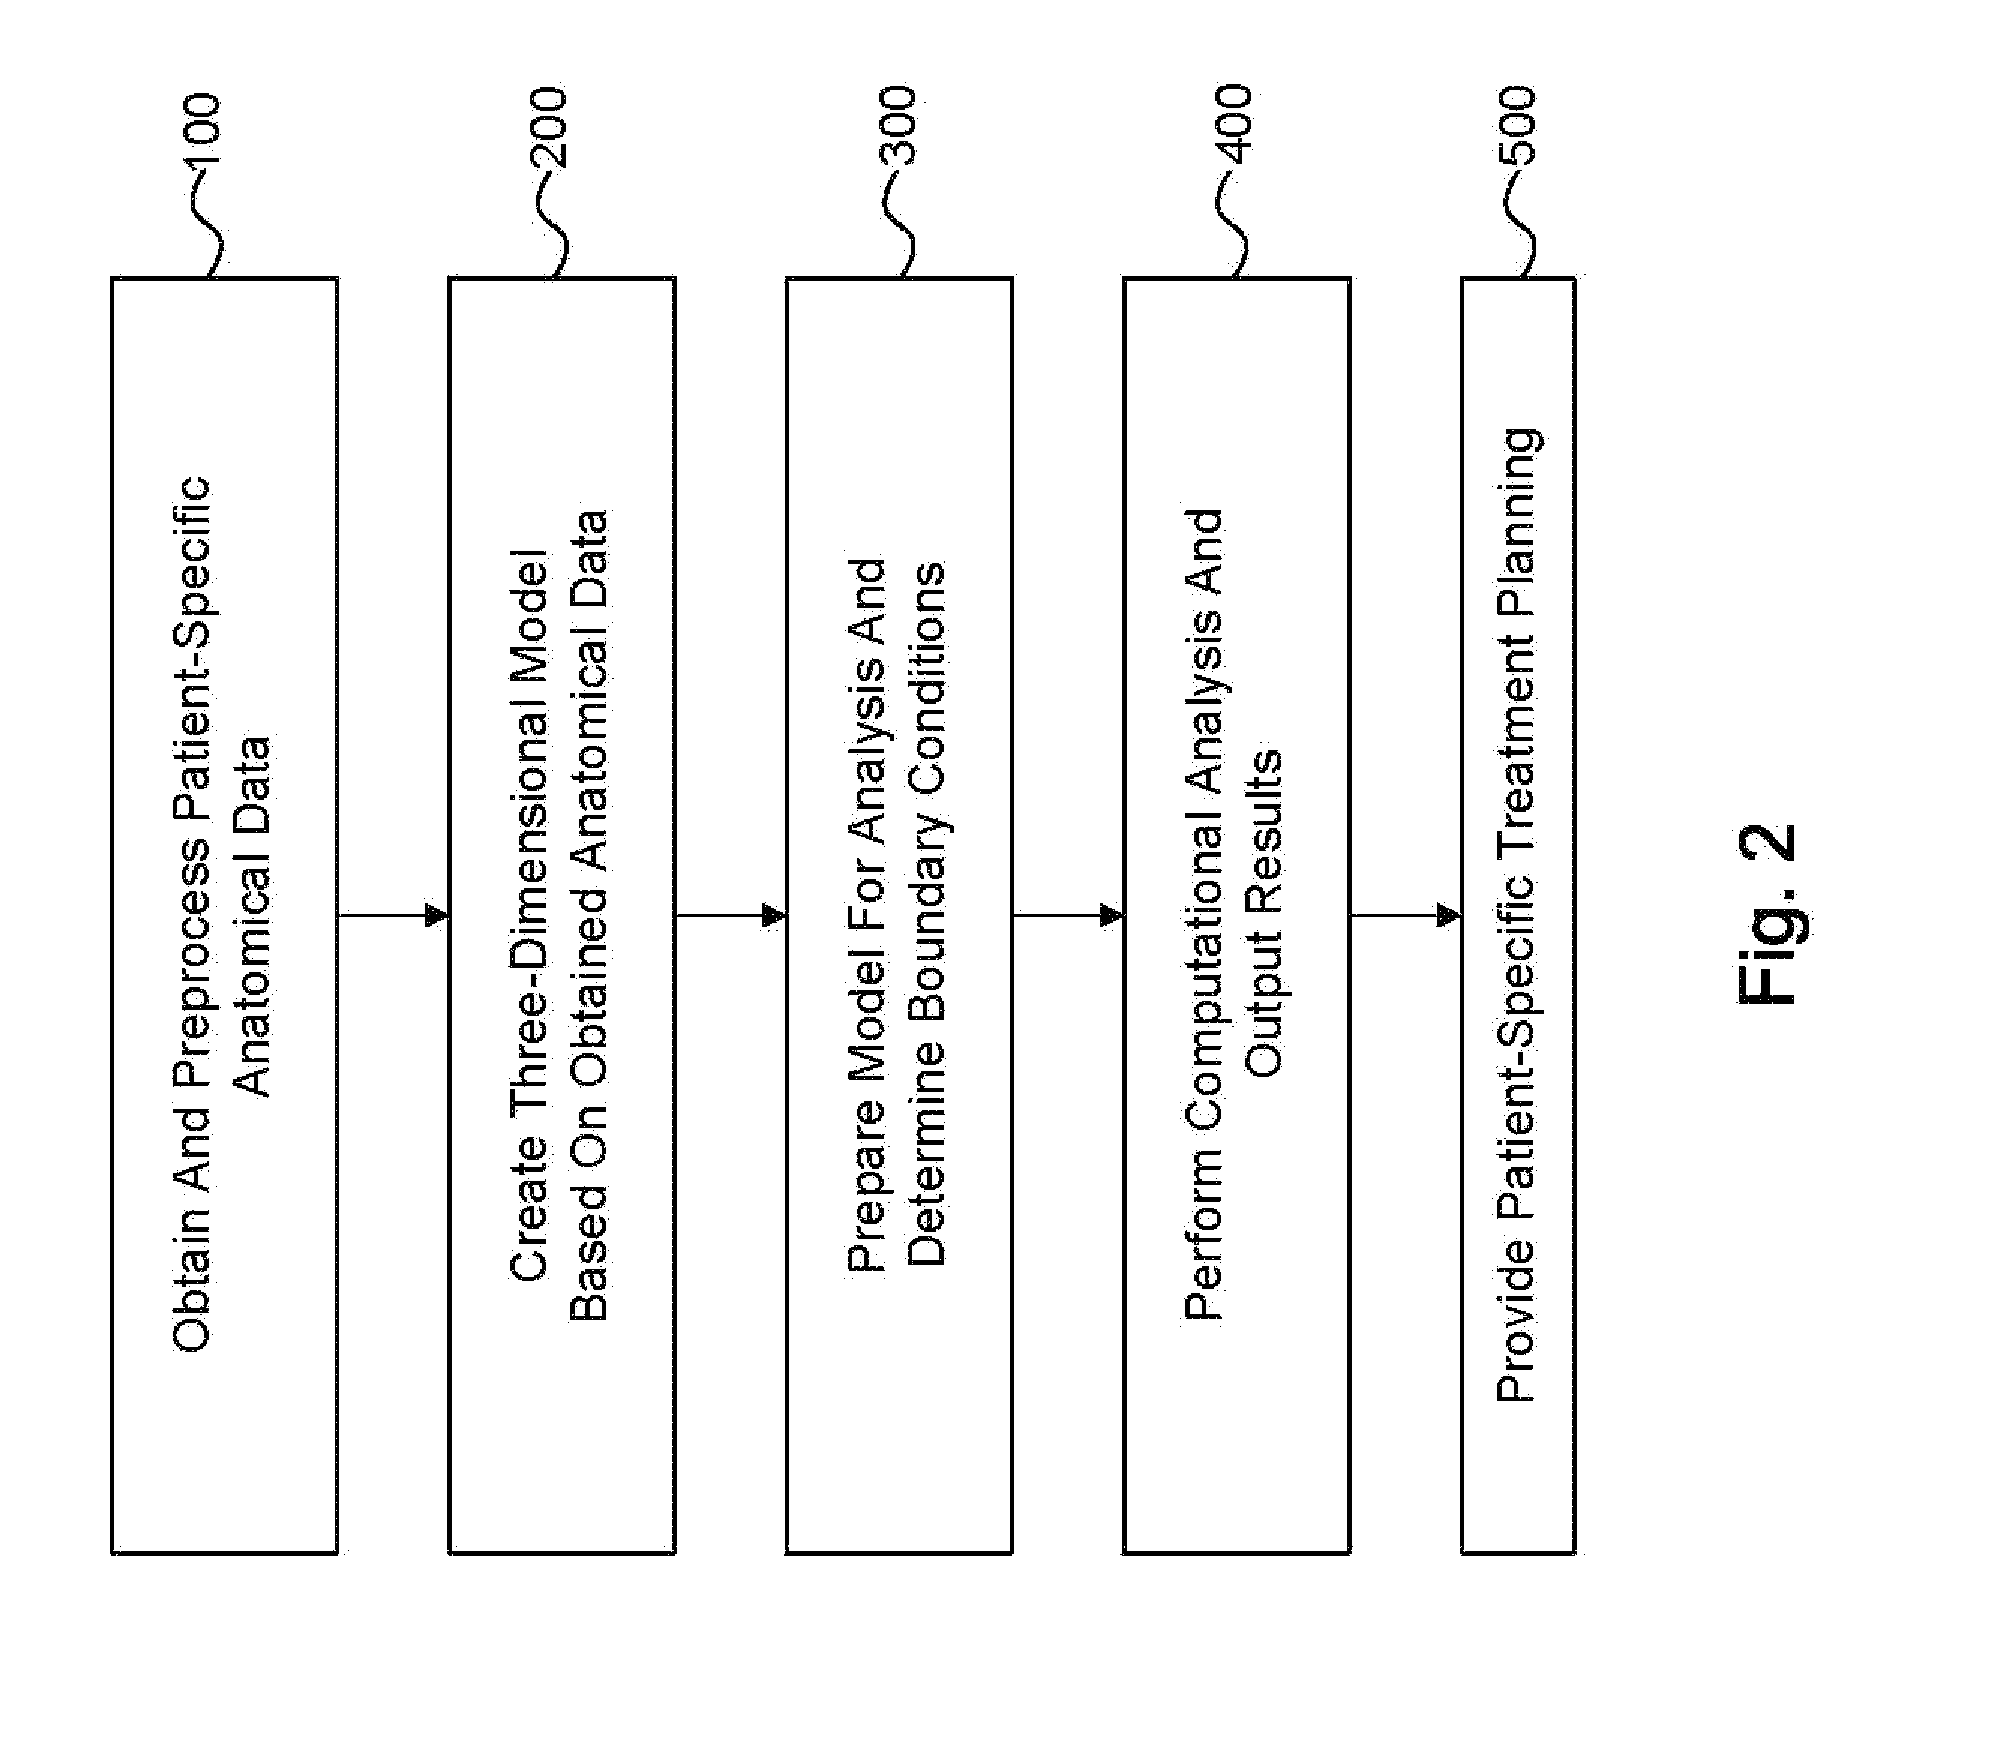 Method and system for patient-specific modeling of blood flow